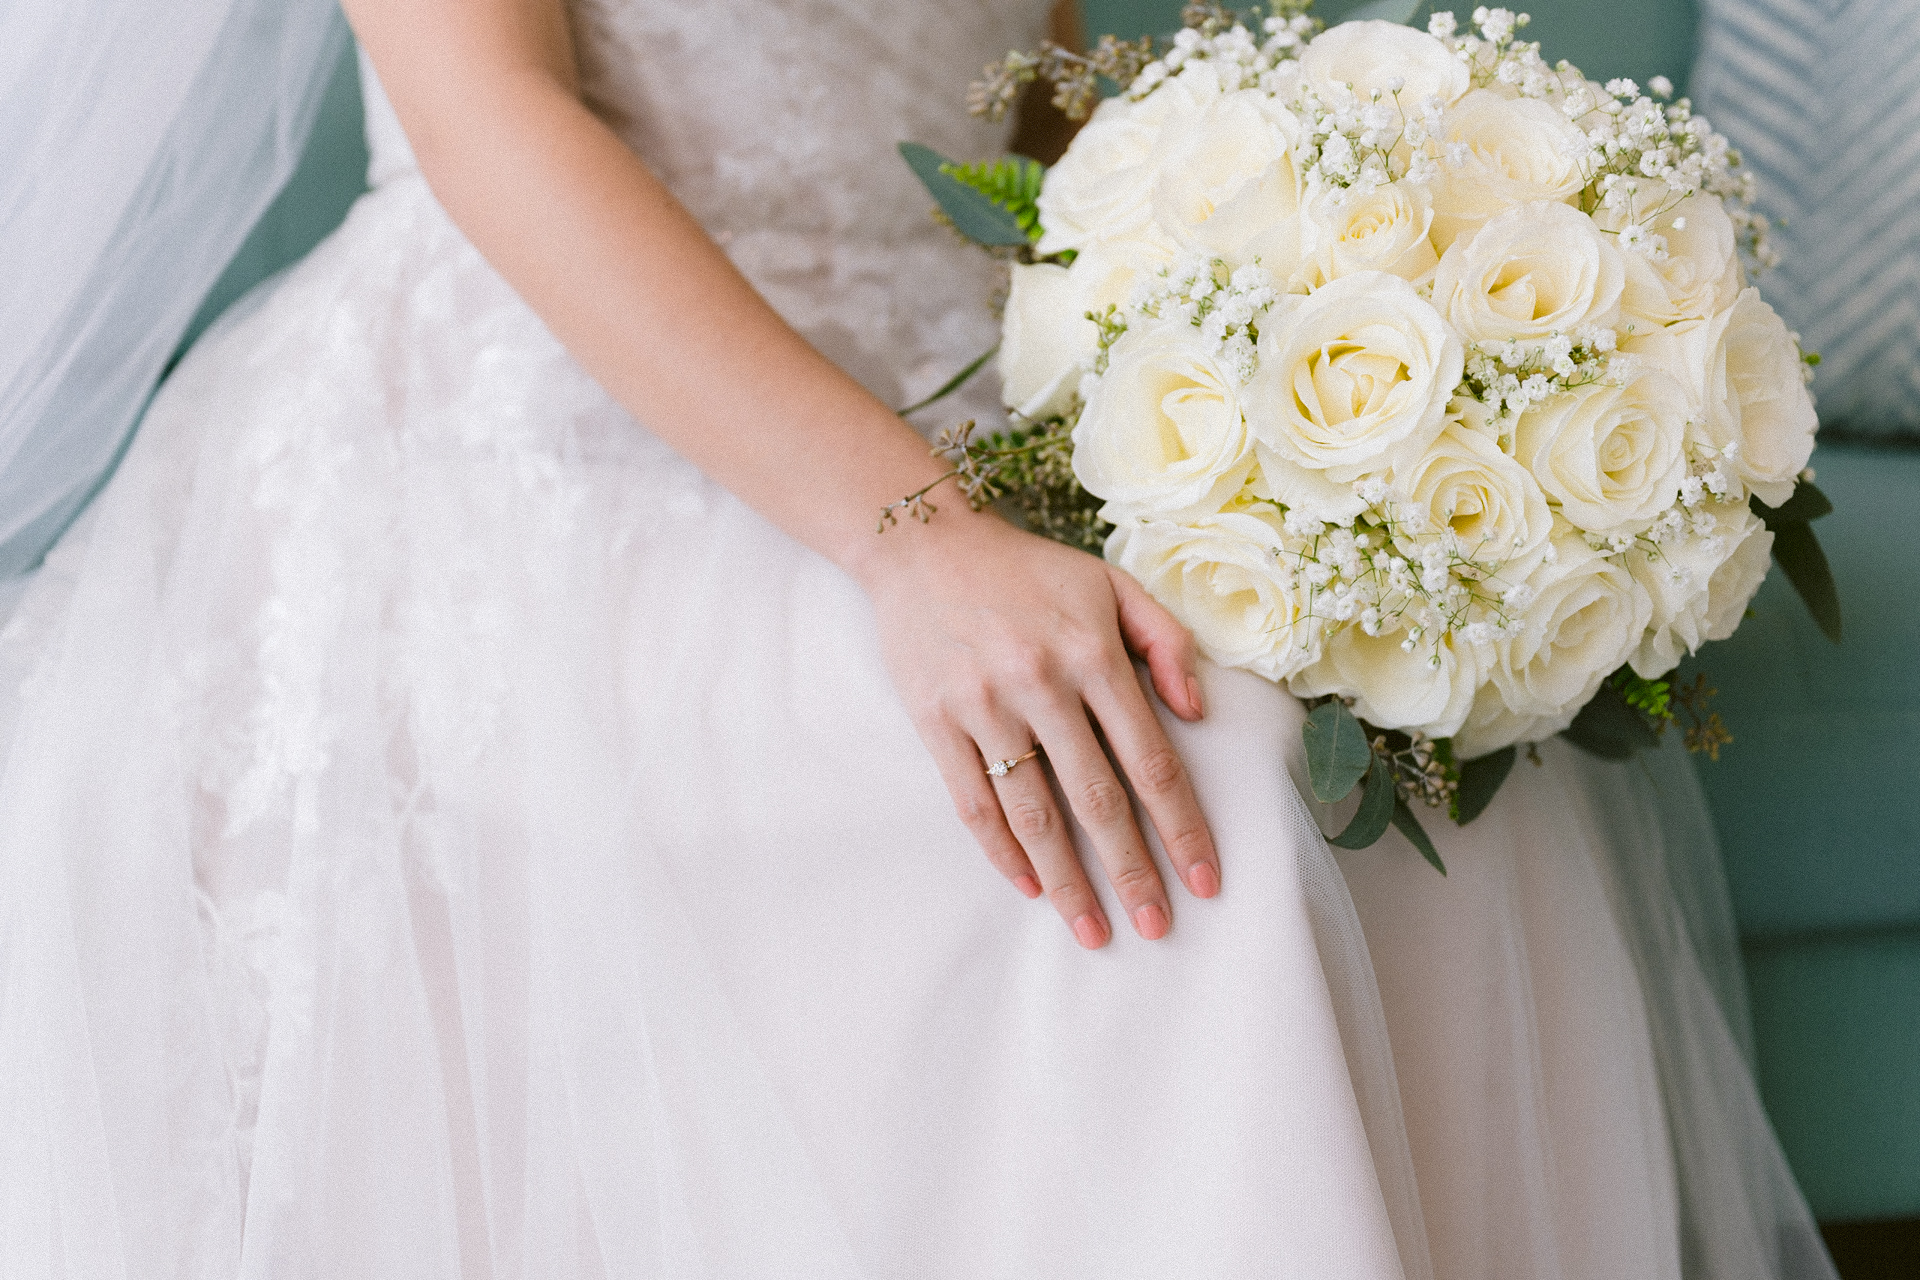 Bride holding a bouquet of white roses with a focus on her hand and wedding ring.